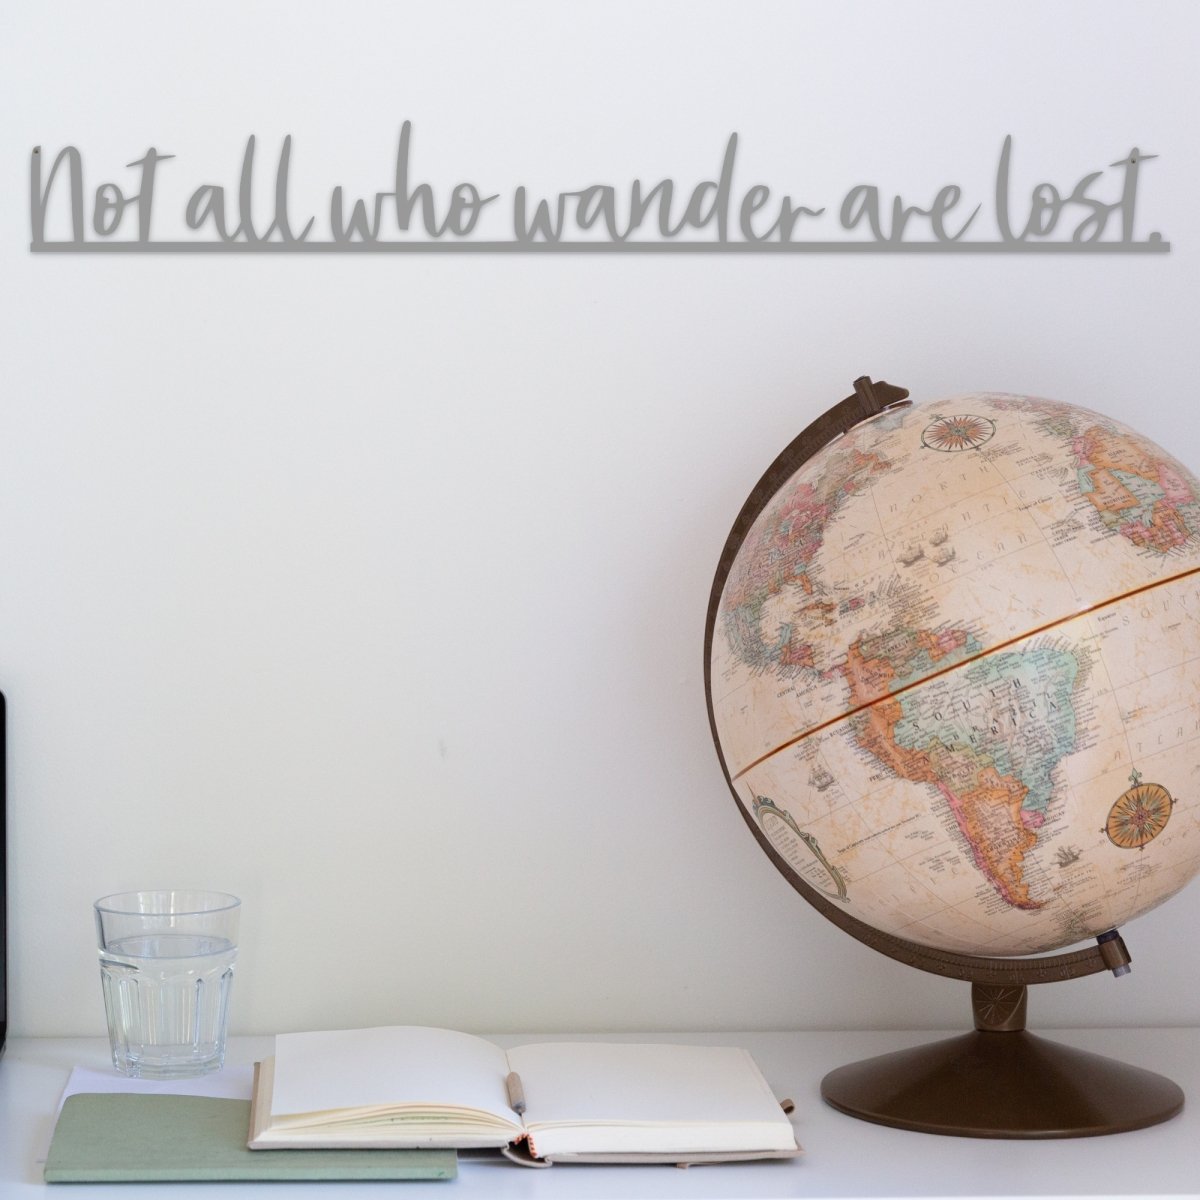 Not all who wander are lost Sign | Metal Wall Art - Simply Royal Design